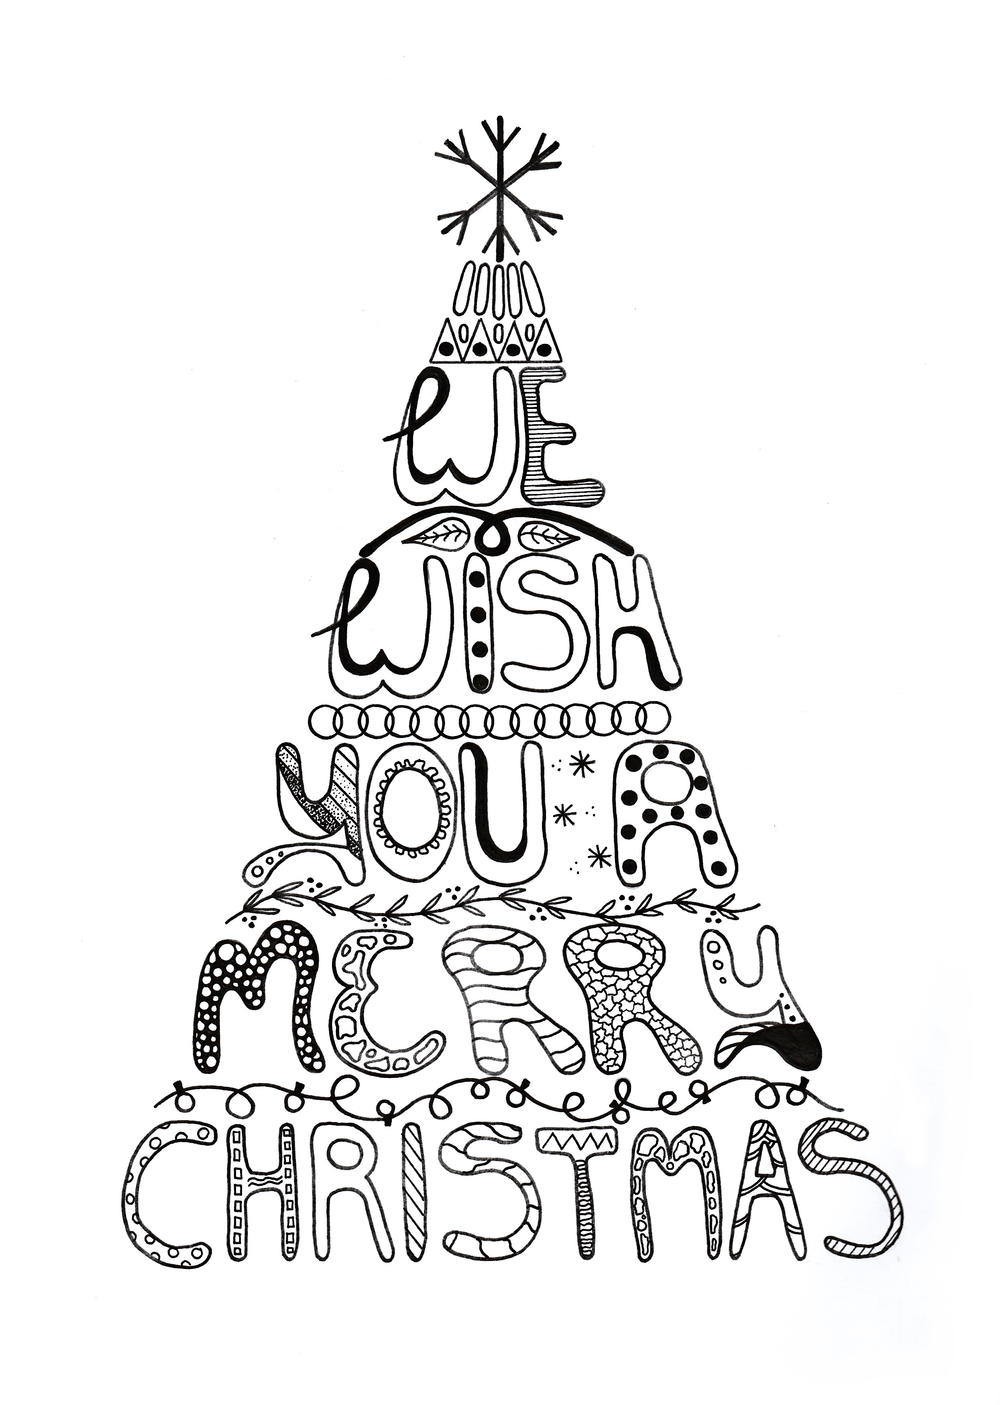 merry-christmas-adult-coloring-page-allfreepapercrafts